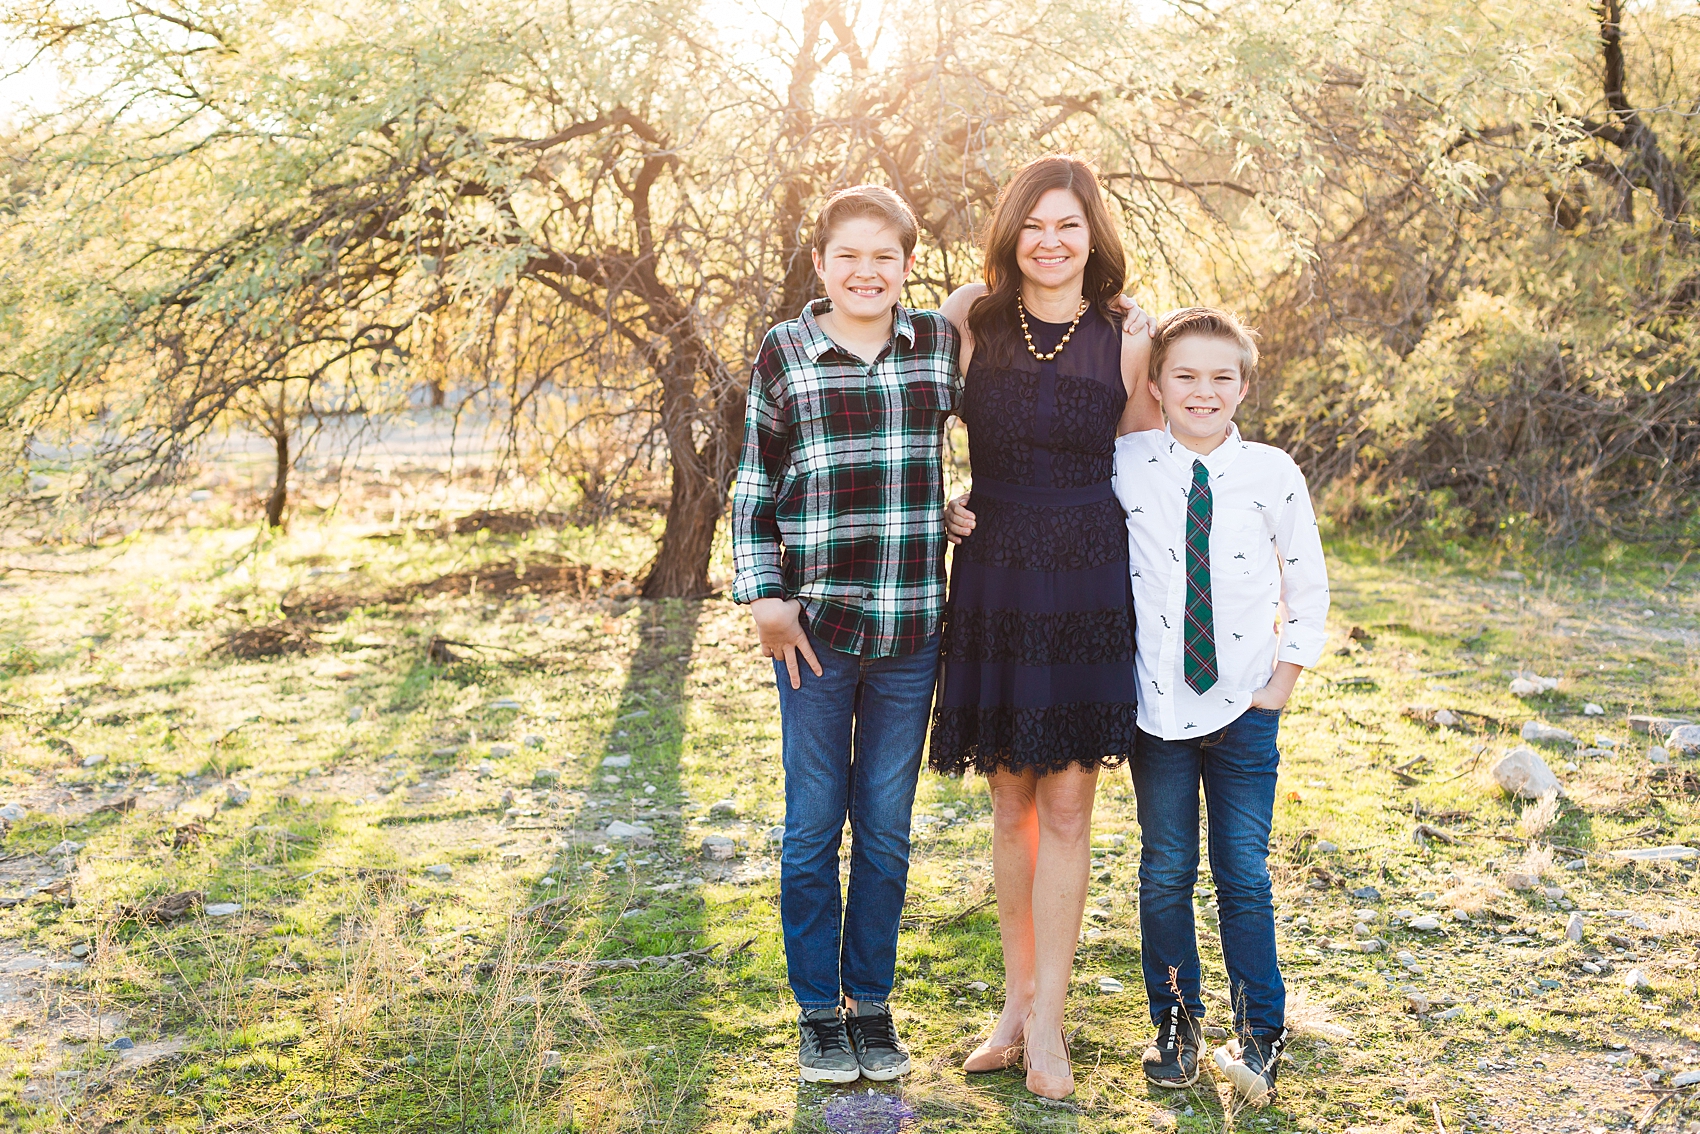 Leah Hope Photography | Scottsdale Phoenix Arizona | Dreamy Draw Desert Landscape | Family Pictures | What to Wear